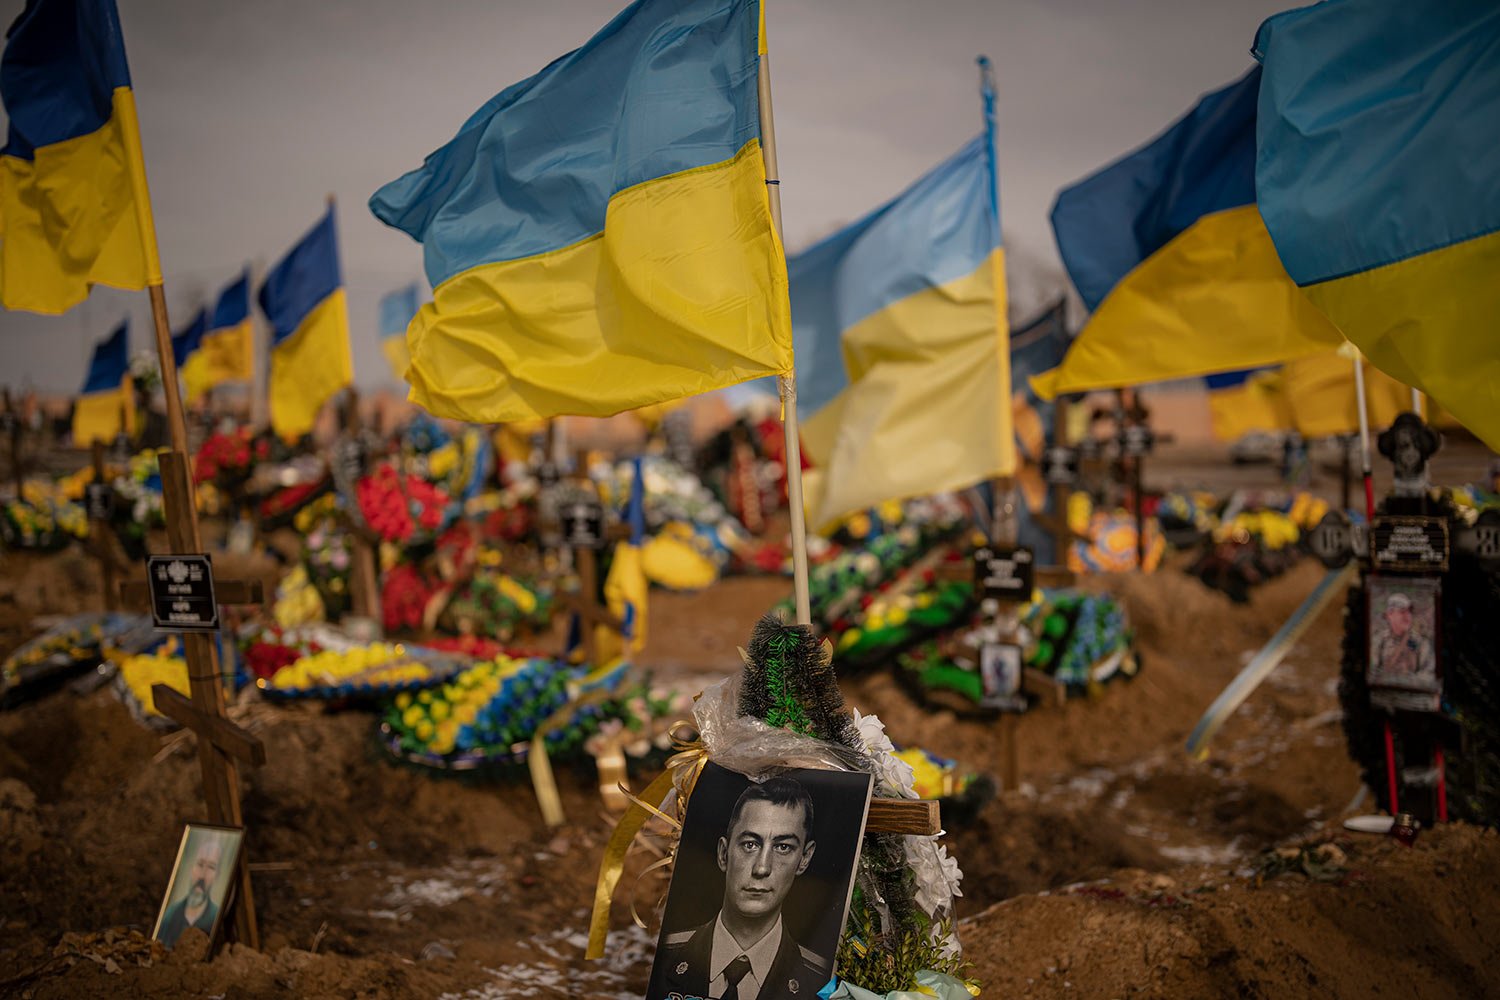  A photograph of a Ukrainian serviceman is placed on his grave in the Alley of Glory section of the cemetery in Kharkiv, Ukraine, Friday, Feb. 24, 2023. (AP Photo/Vadim Ghirda) 